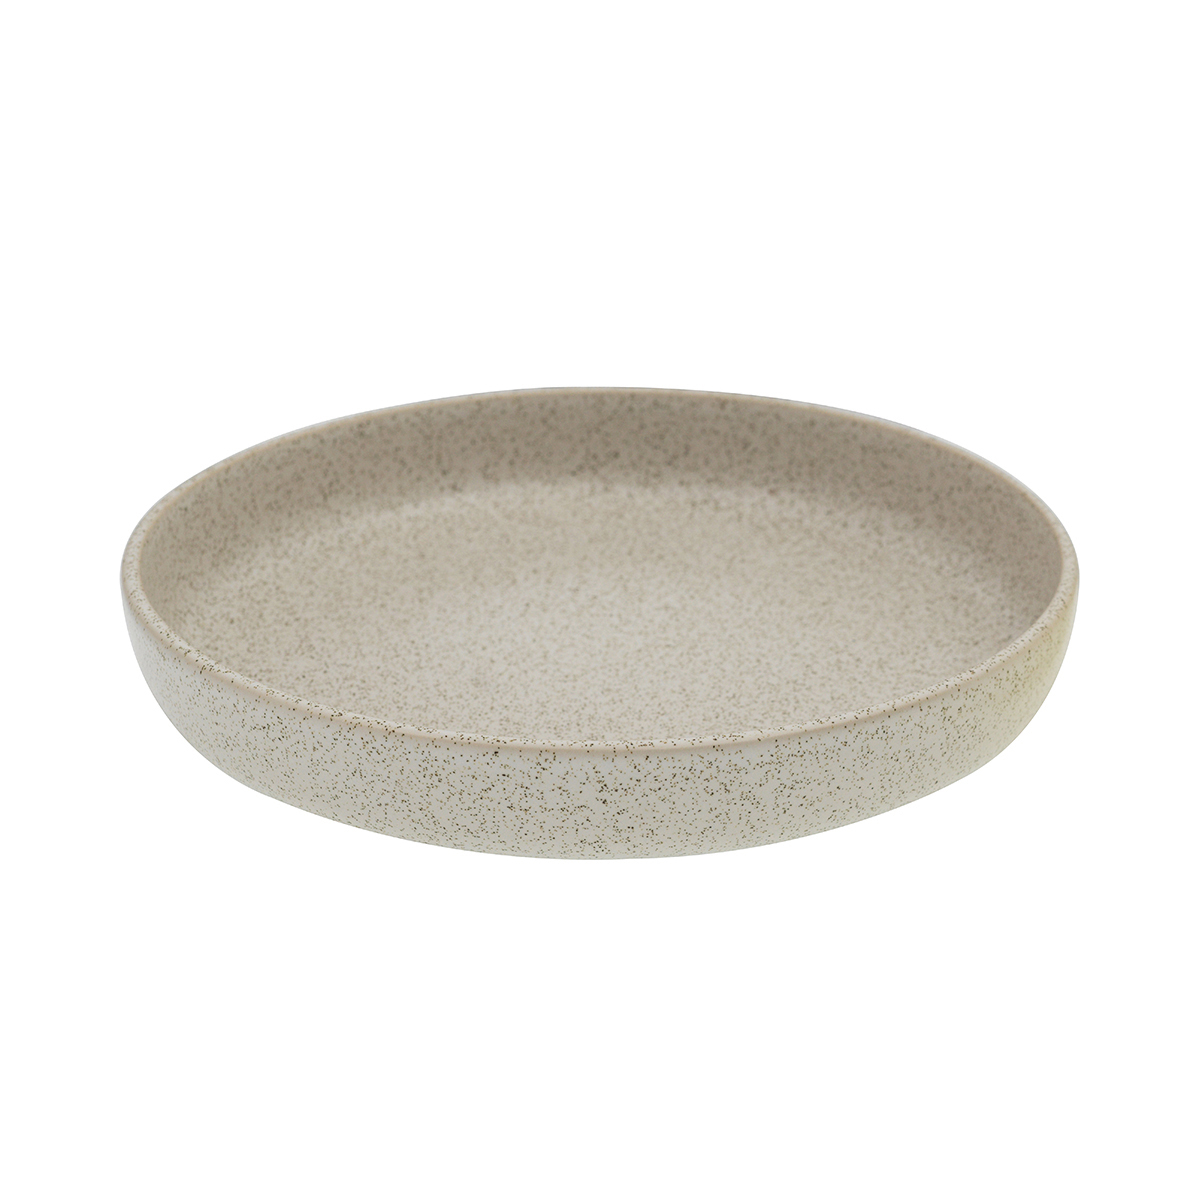 EASE CLAY ROUND DEEP PLATES